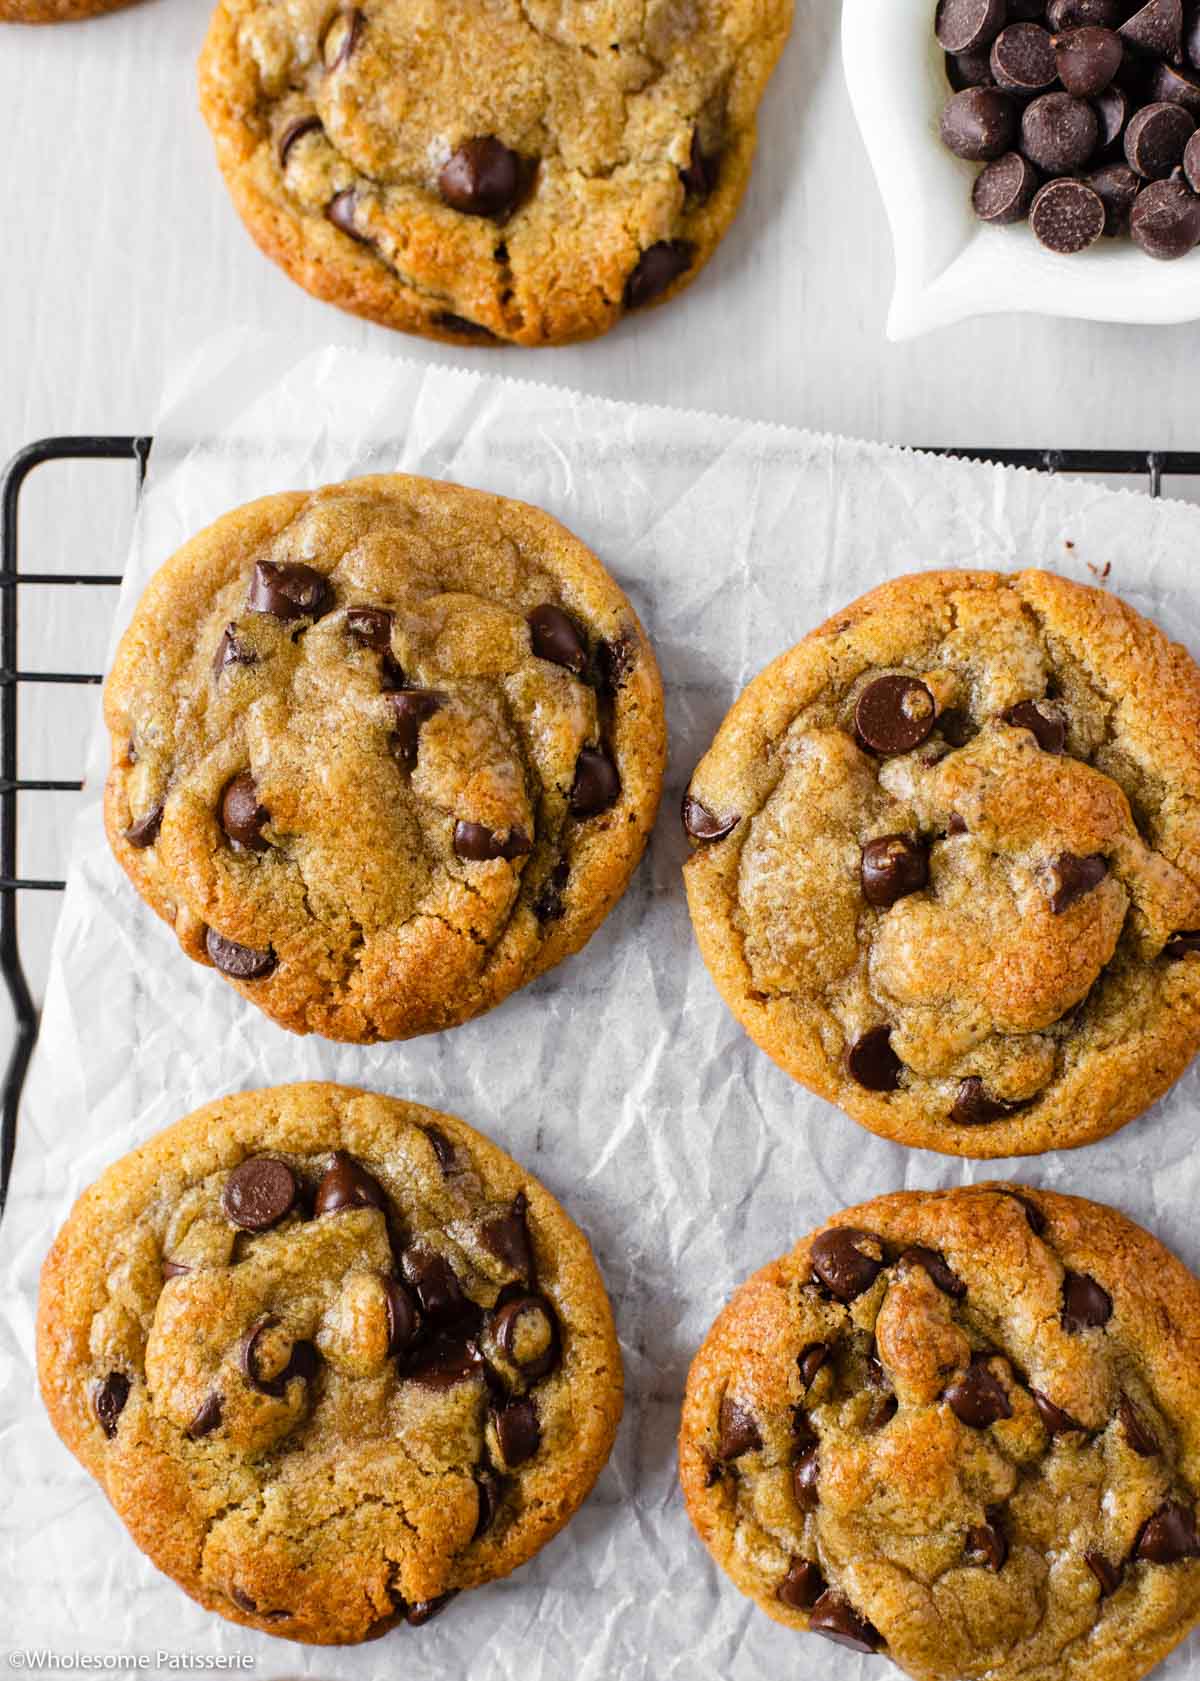 Overhead image of chocolate chip cookies